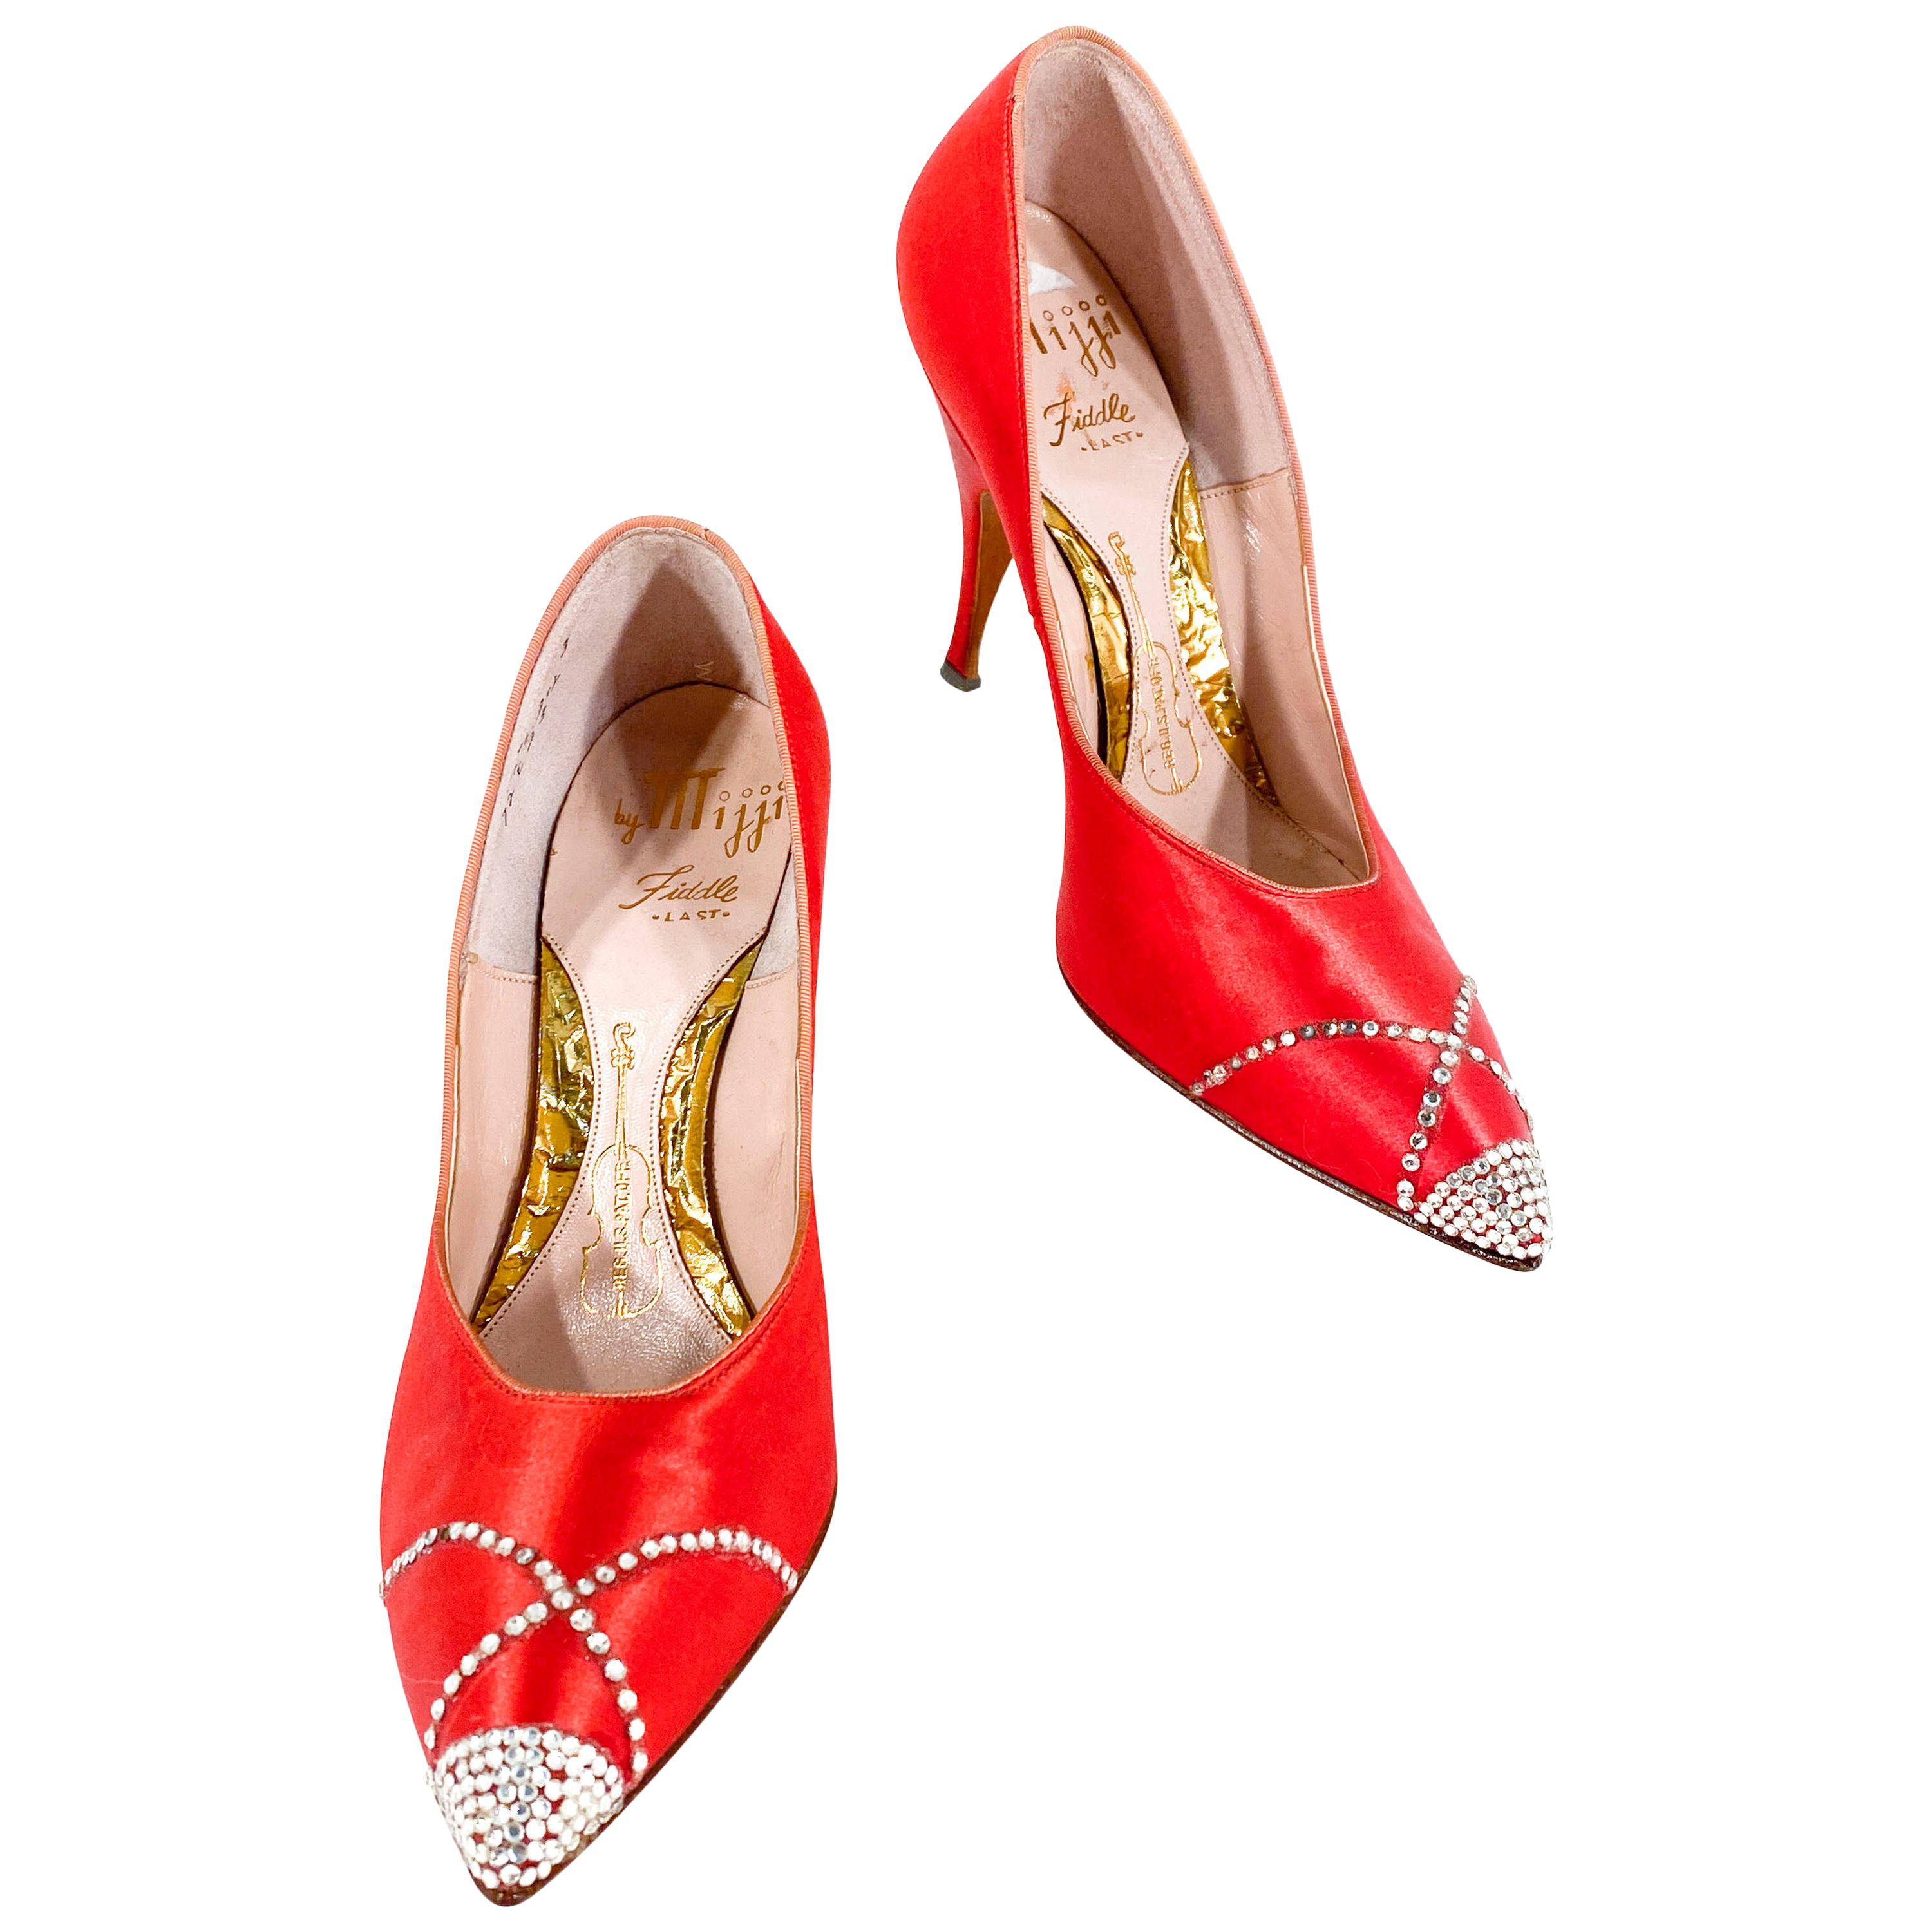 1960s Red Satin Stiletto Heels With Rhinestone Accents